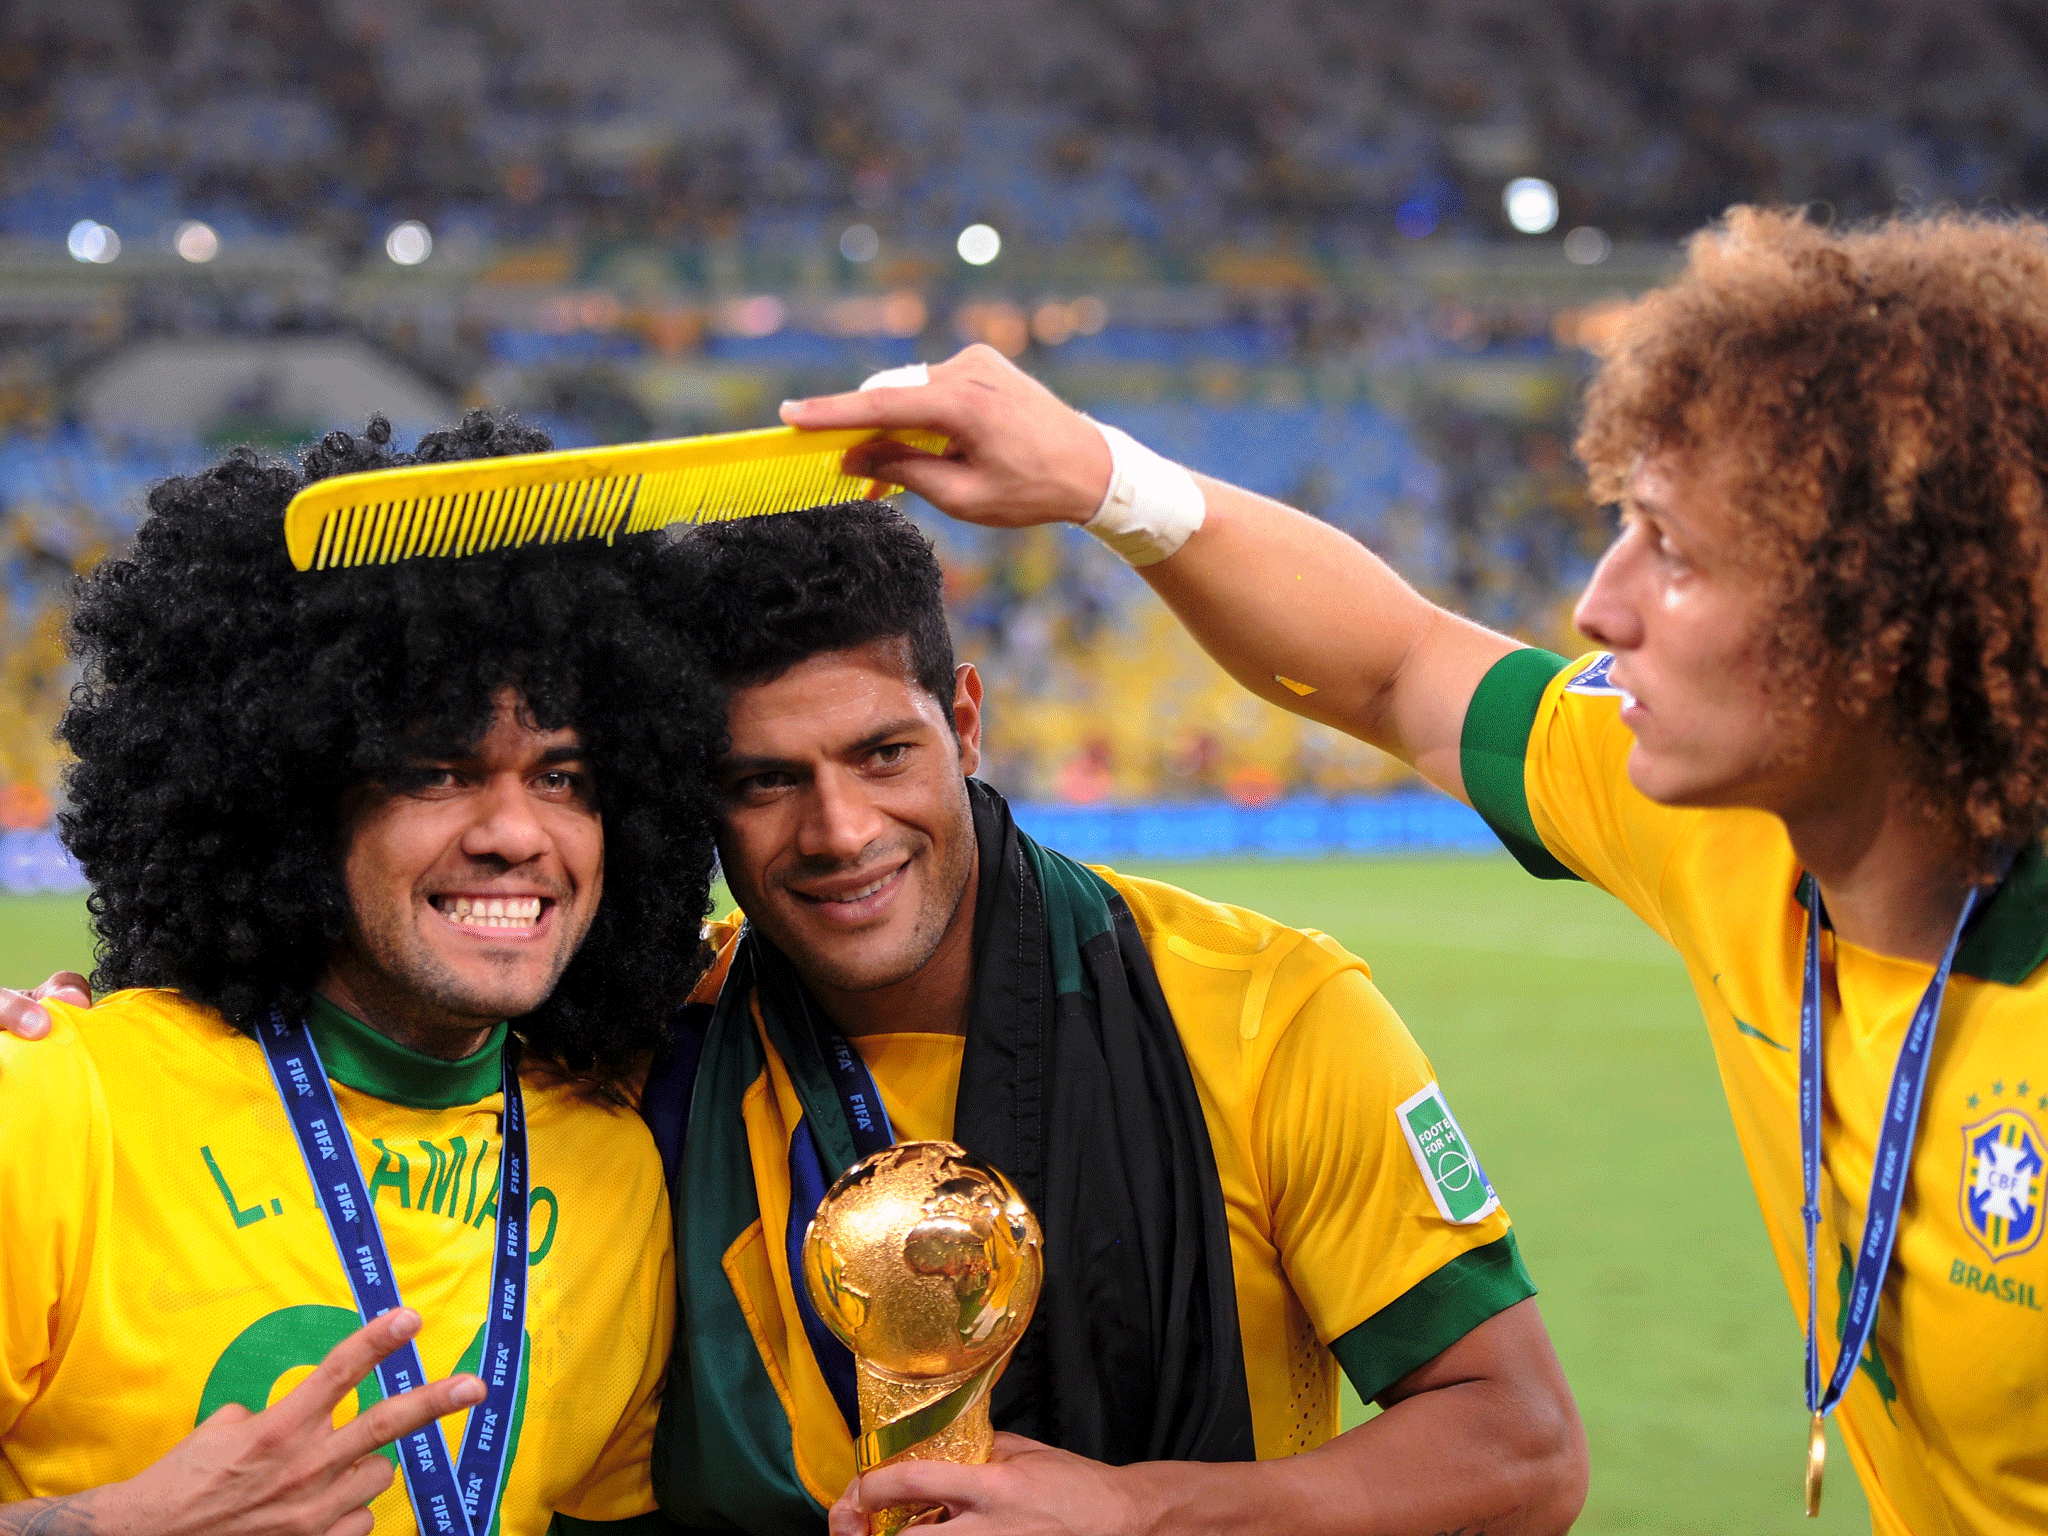 David Luiz (right) uses an extra large comb on the wig of team-mate Dani Alves (left), who is posing next Hulk (centre) after Brazil's Confederations Cup victory GETTY